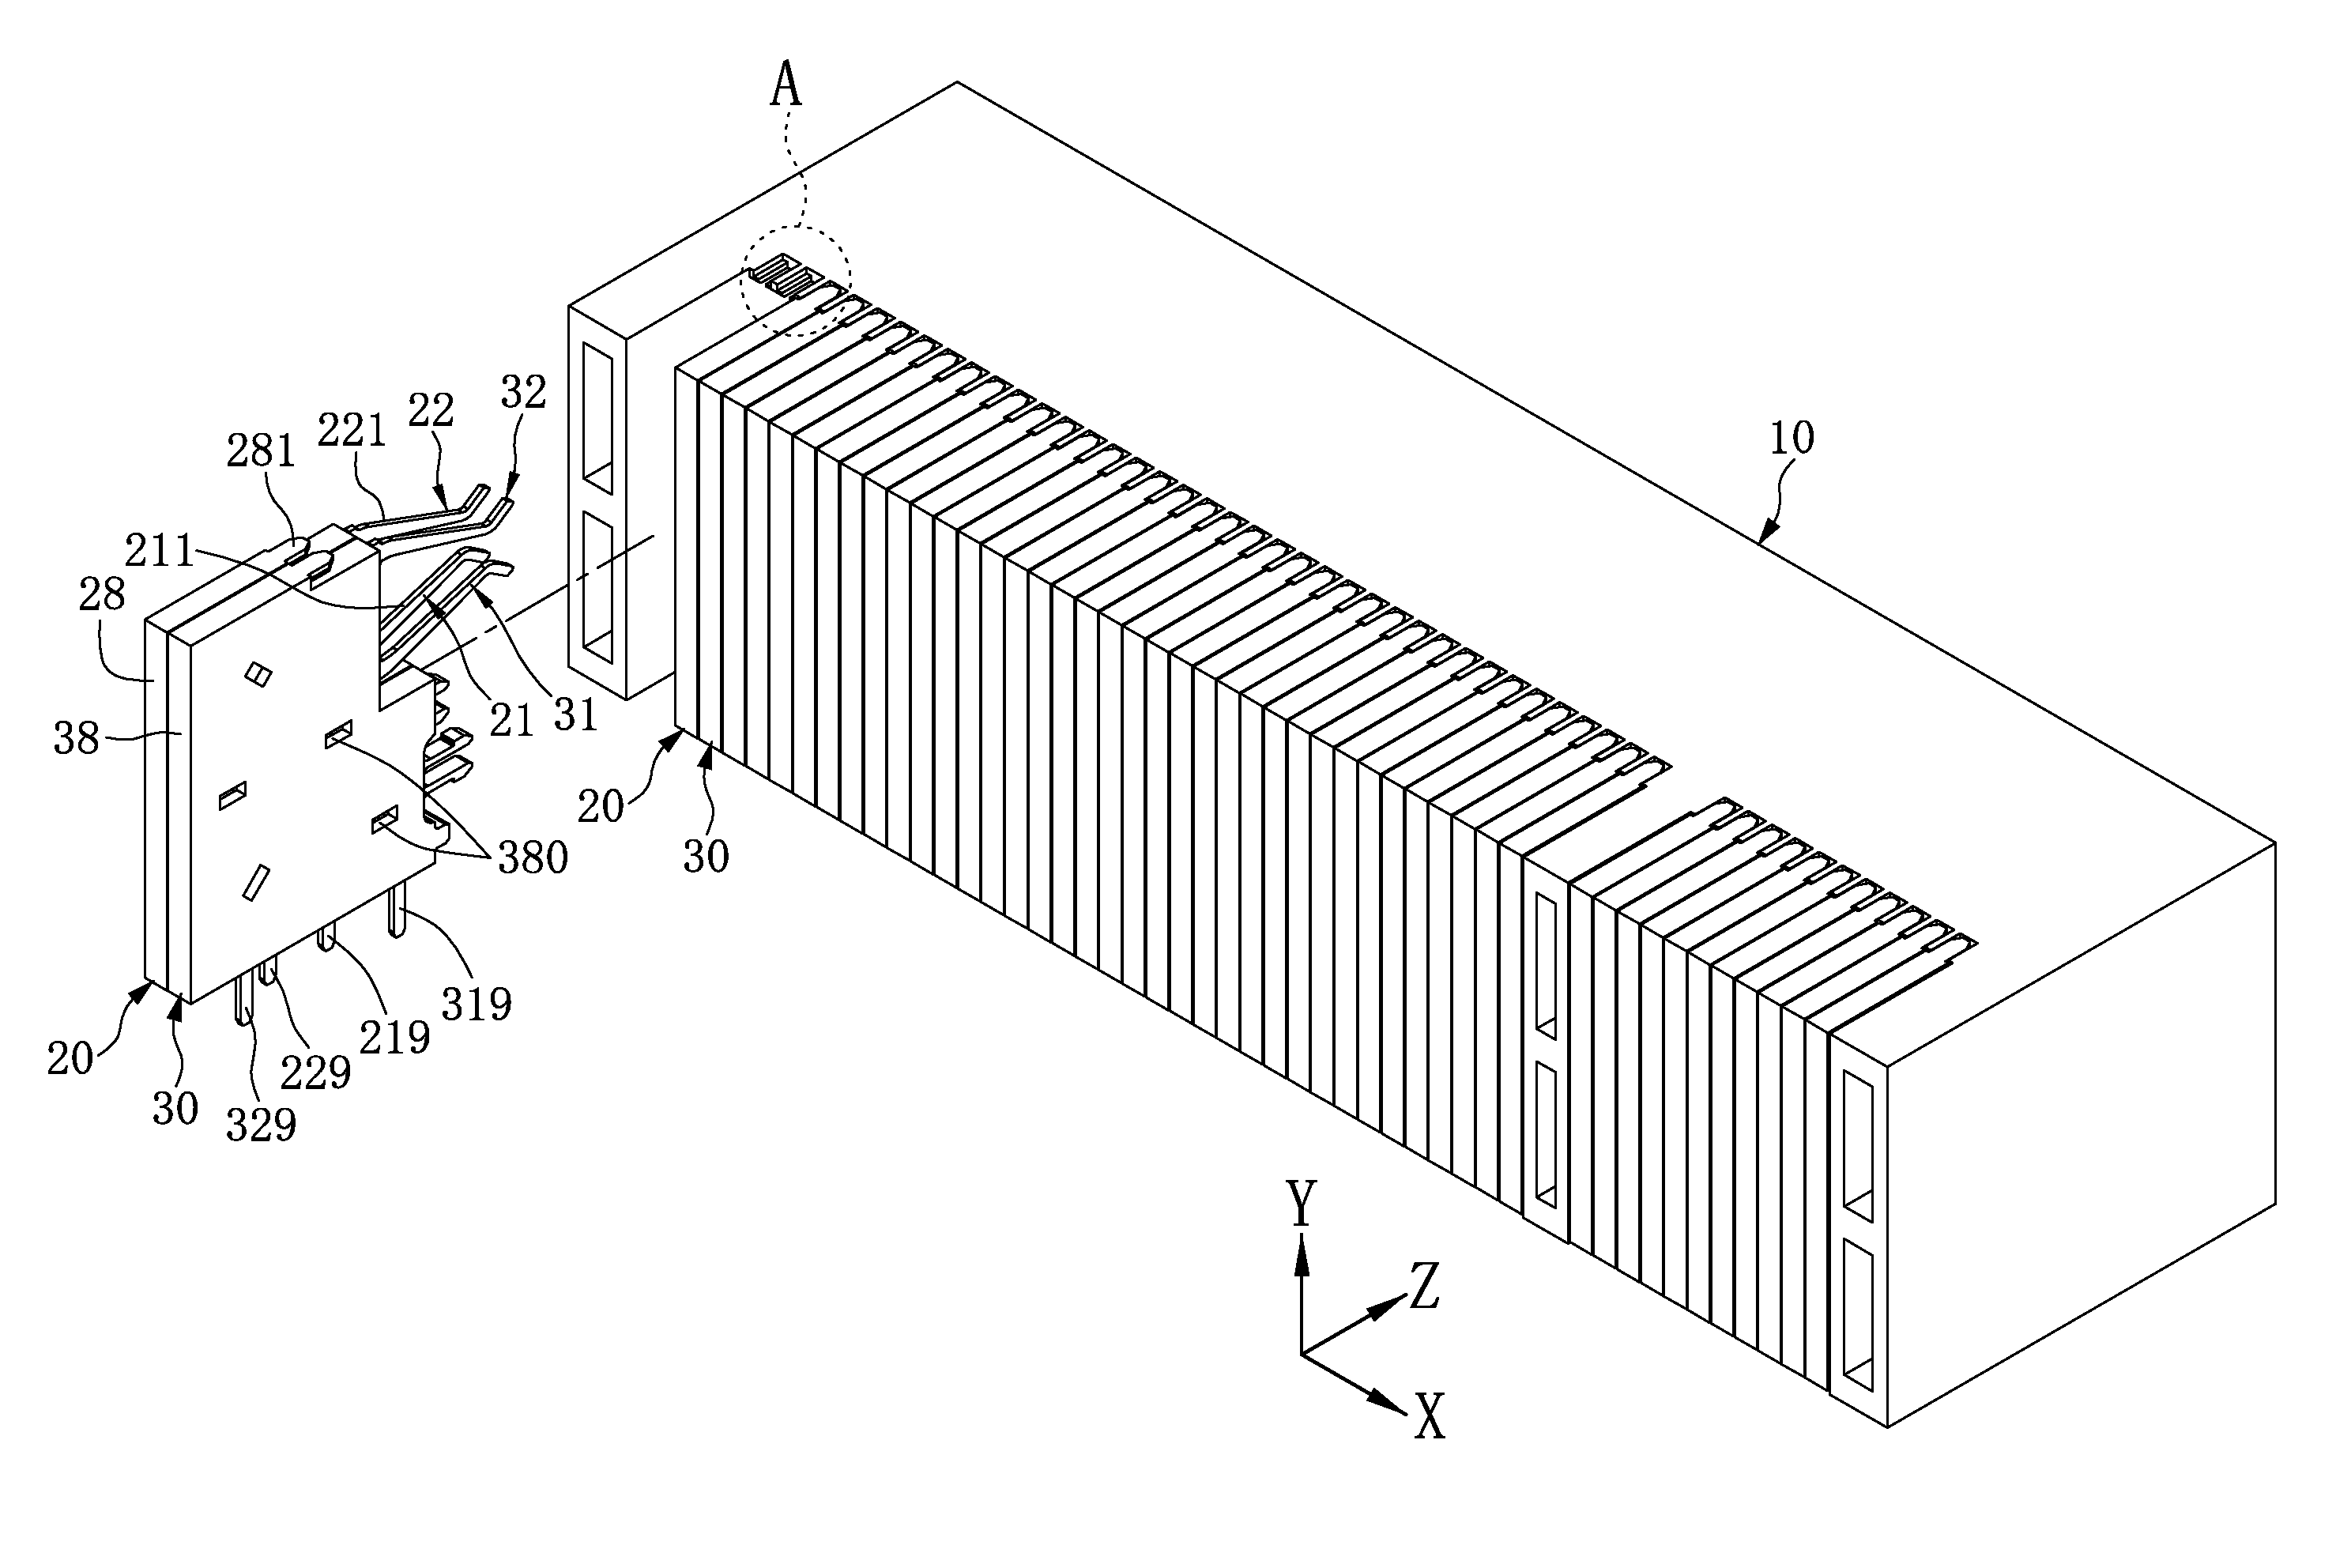 Electrical connector having terminals embedded in a packaging body